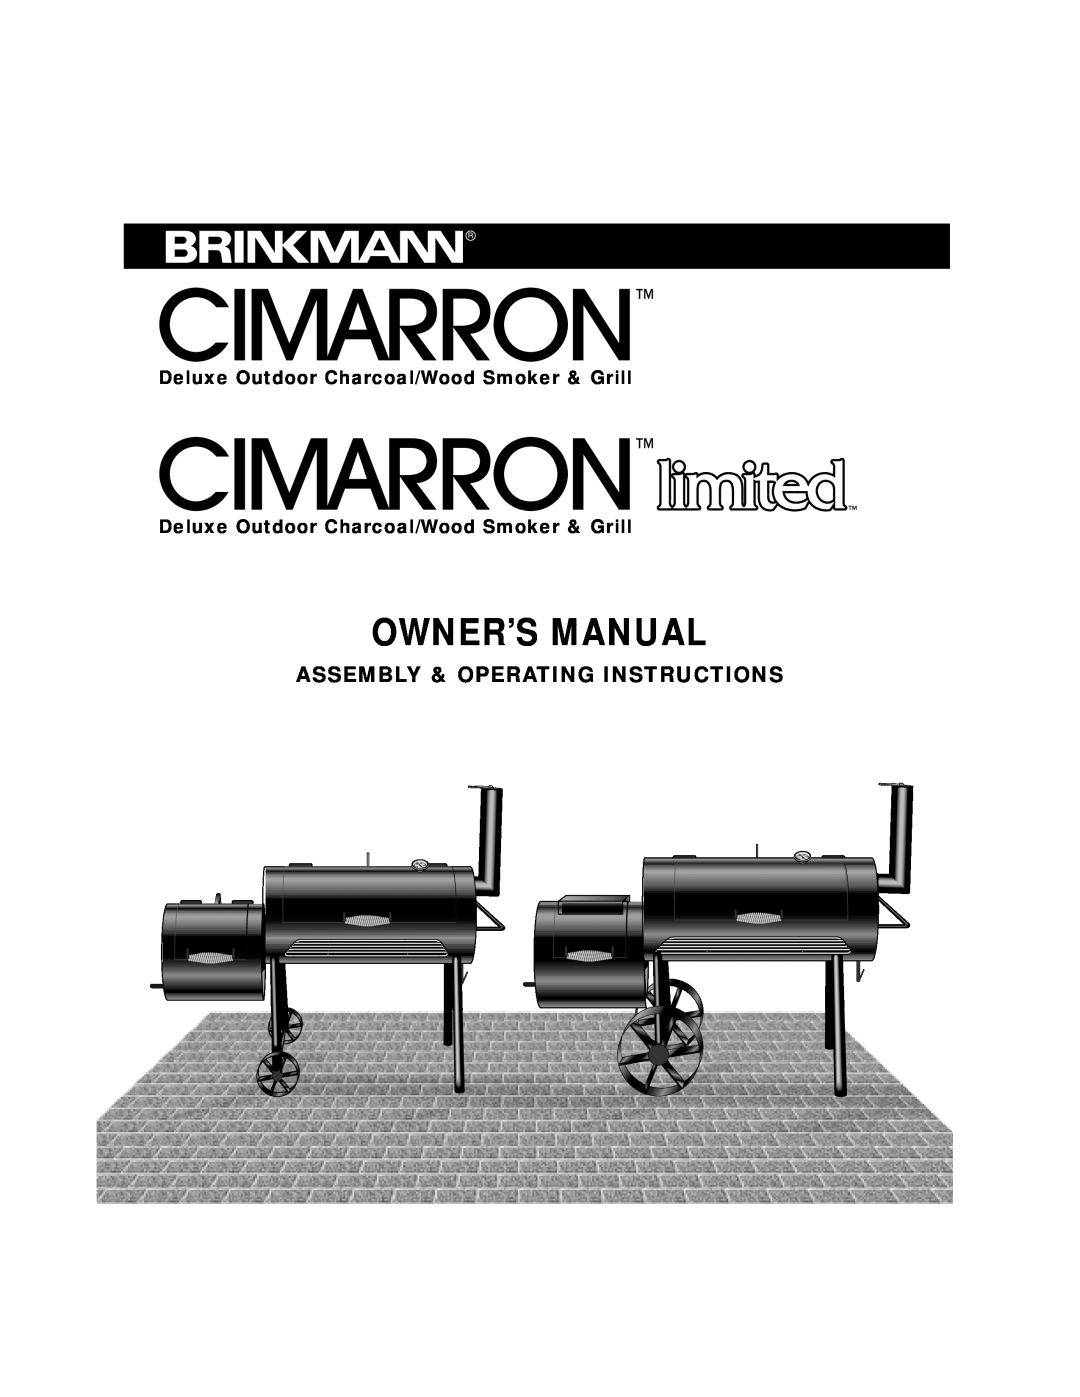 Brinkmann Outdoor Charcoal/Wood Smoker & Grill owner manual Owner’S Manual, Assembly & Operating Instructions 